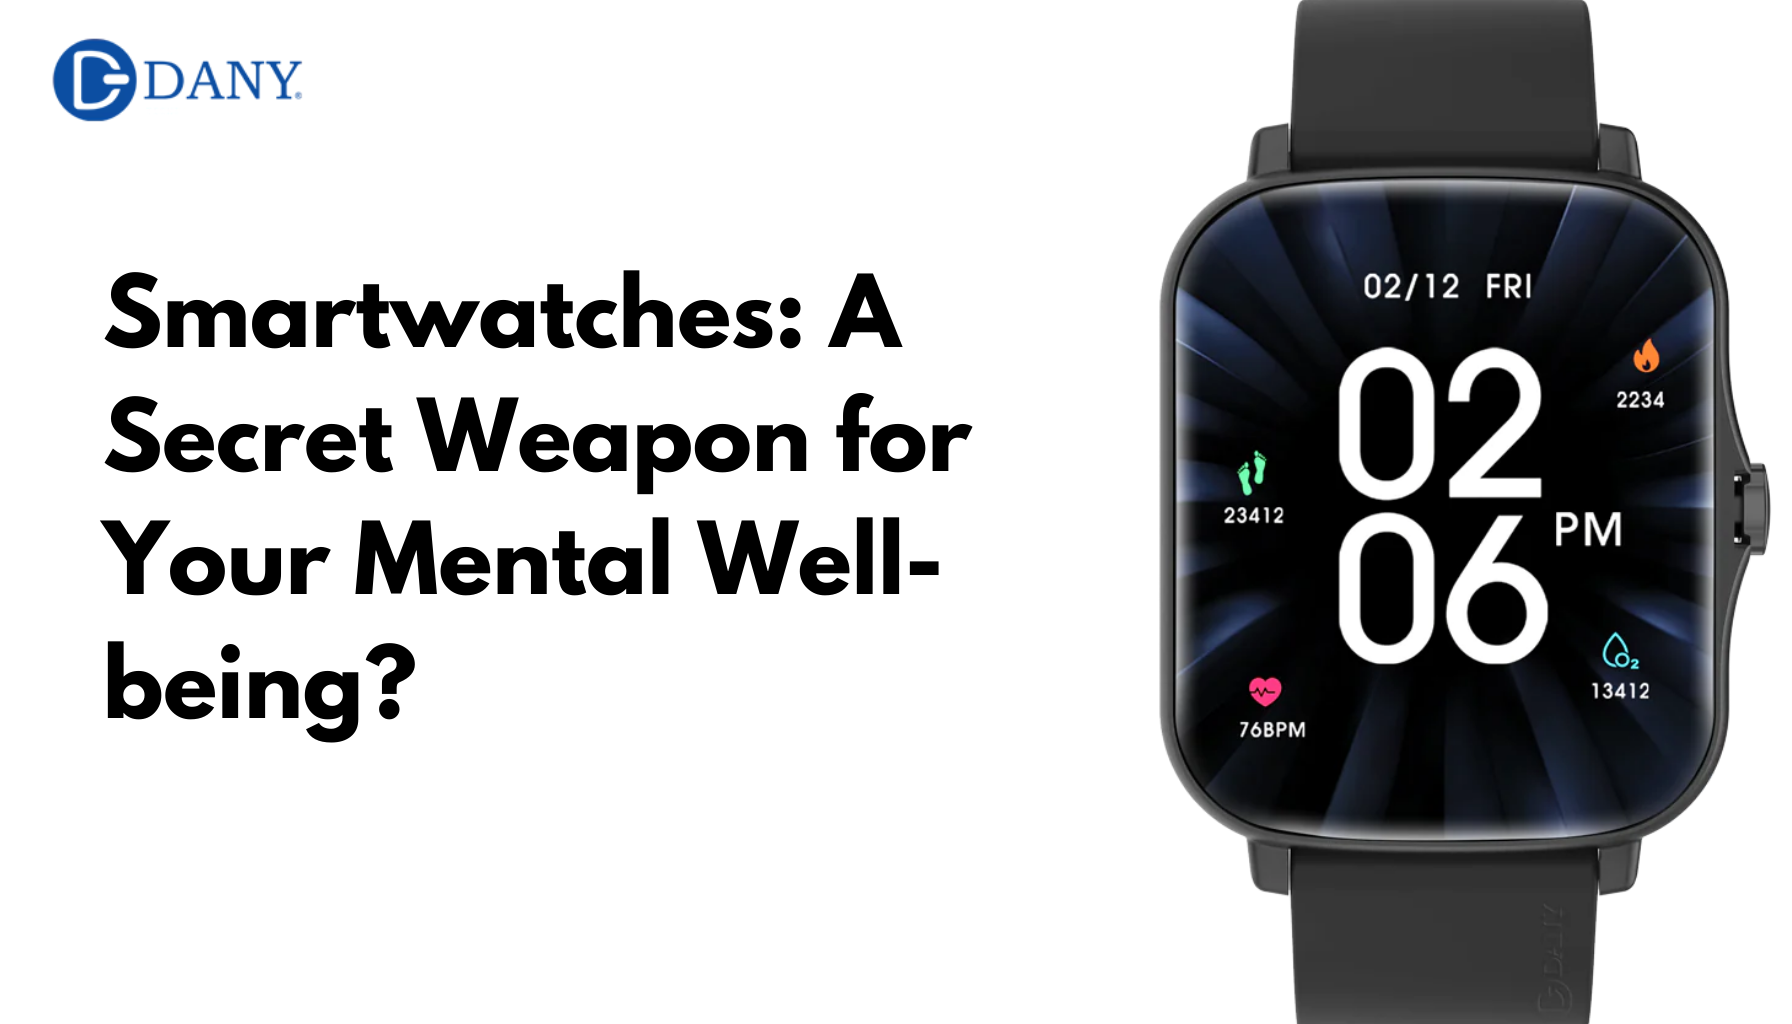 Smartwatches: A Secret Weapon for Your Mental Well-being?